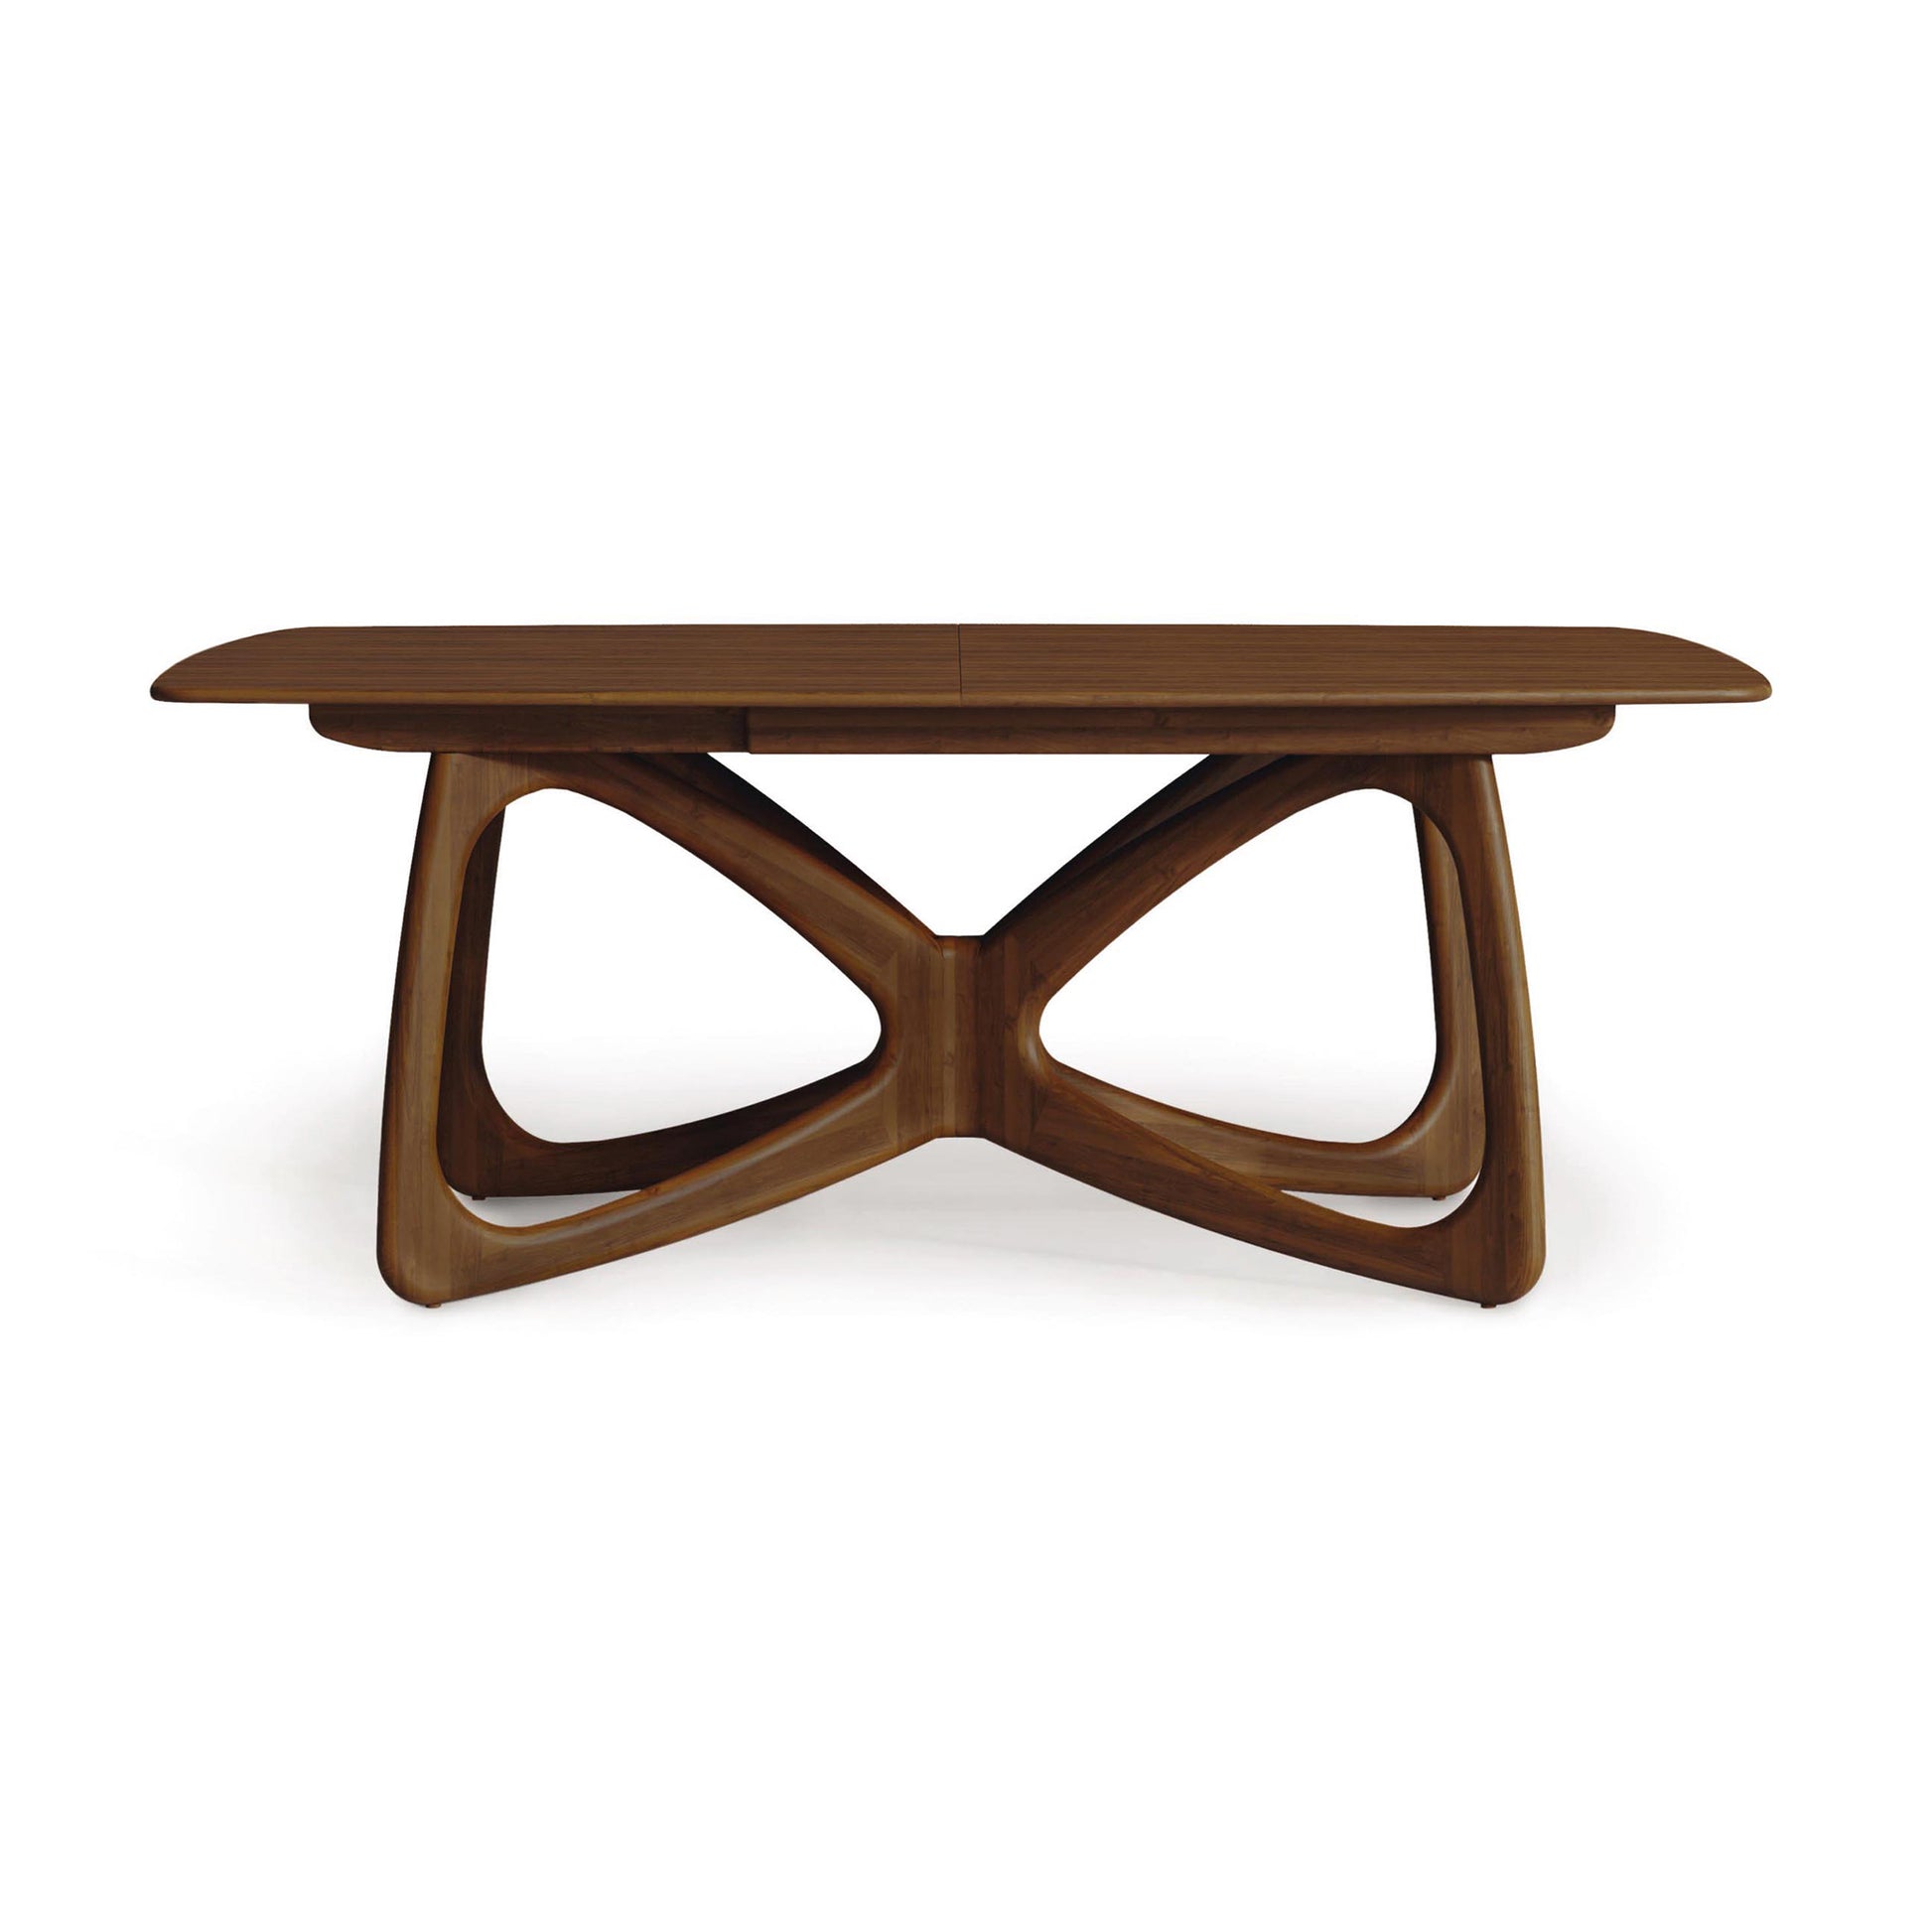 Copeland Furniture Butterfly Extension Dining Table - Modern elliptical wooden dining table with curved interlocking base, sustainably sourced hardwoods, and dark smooth finish. American made solid wood furniture.